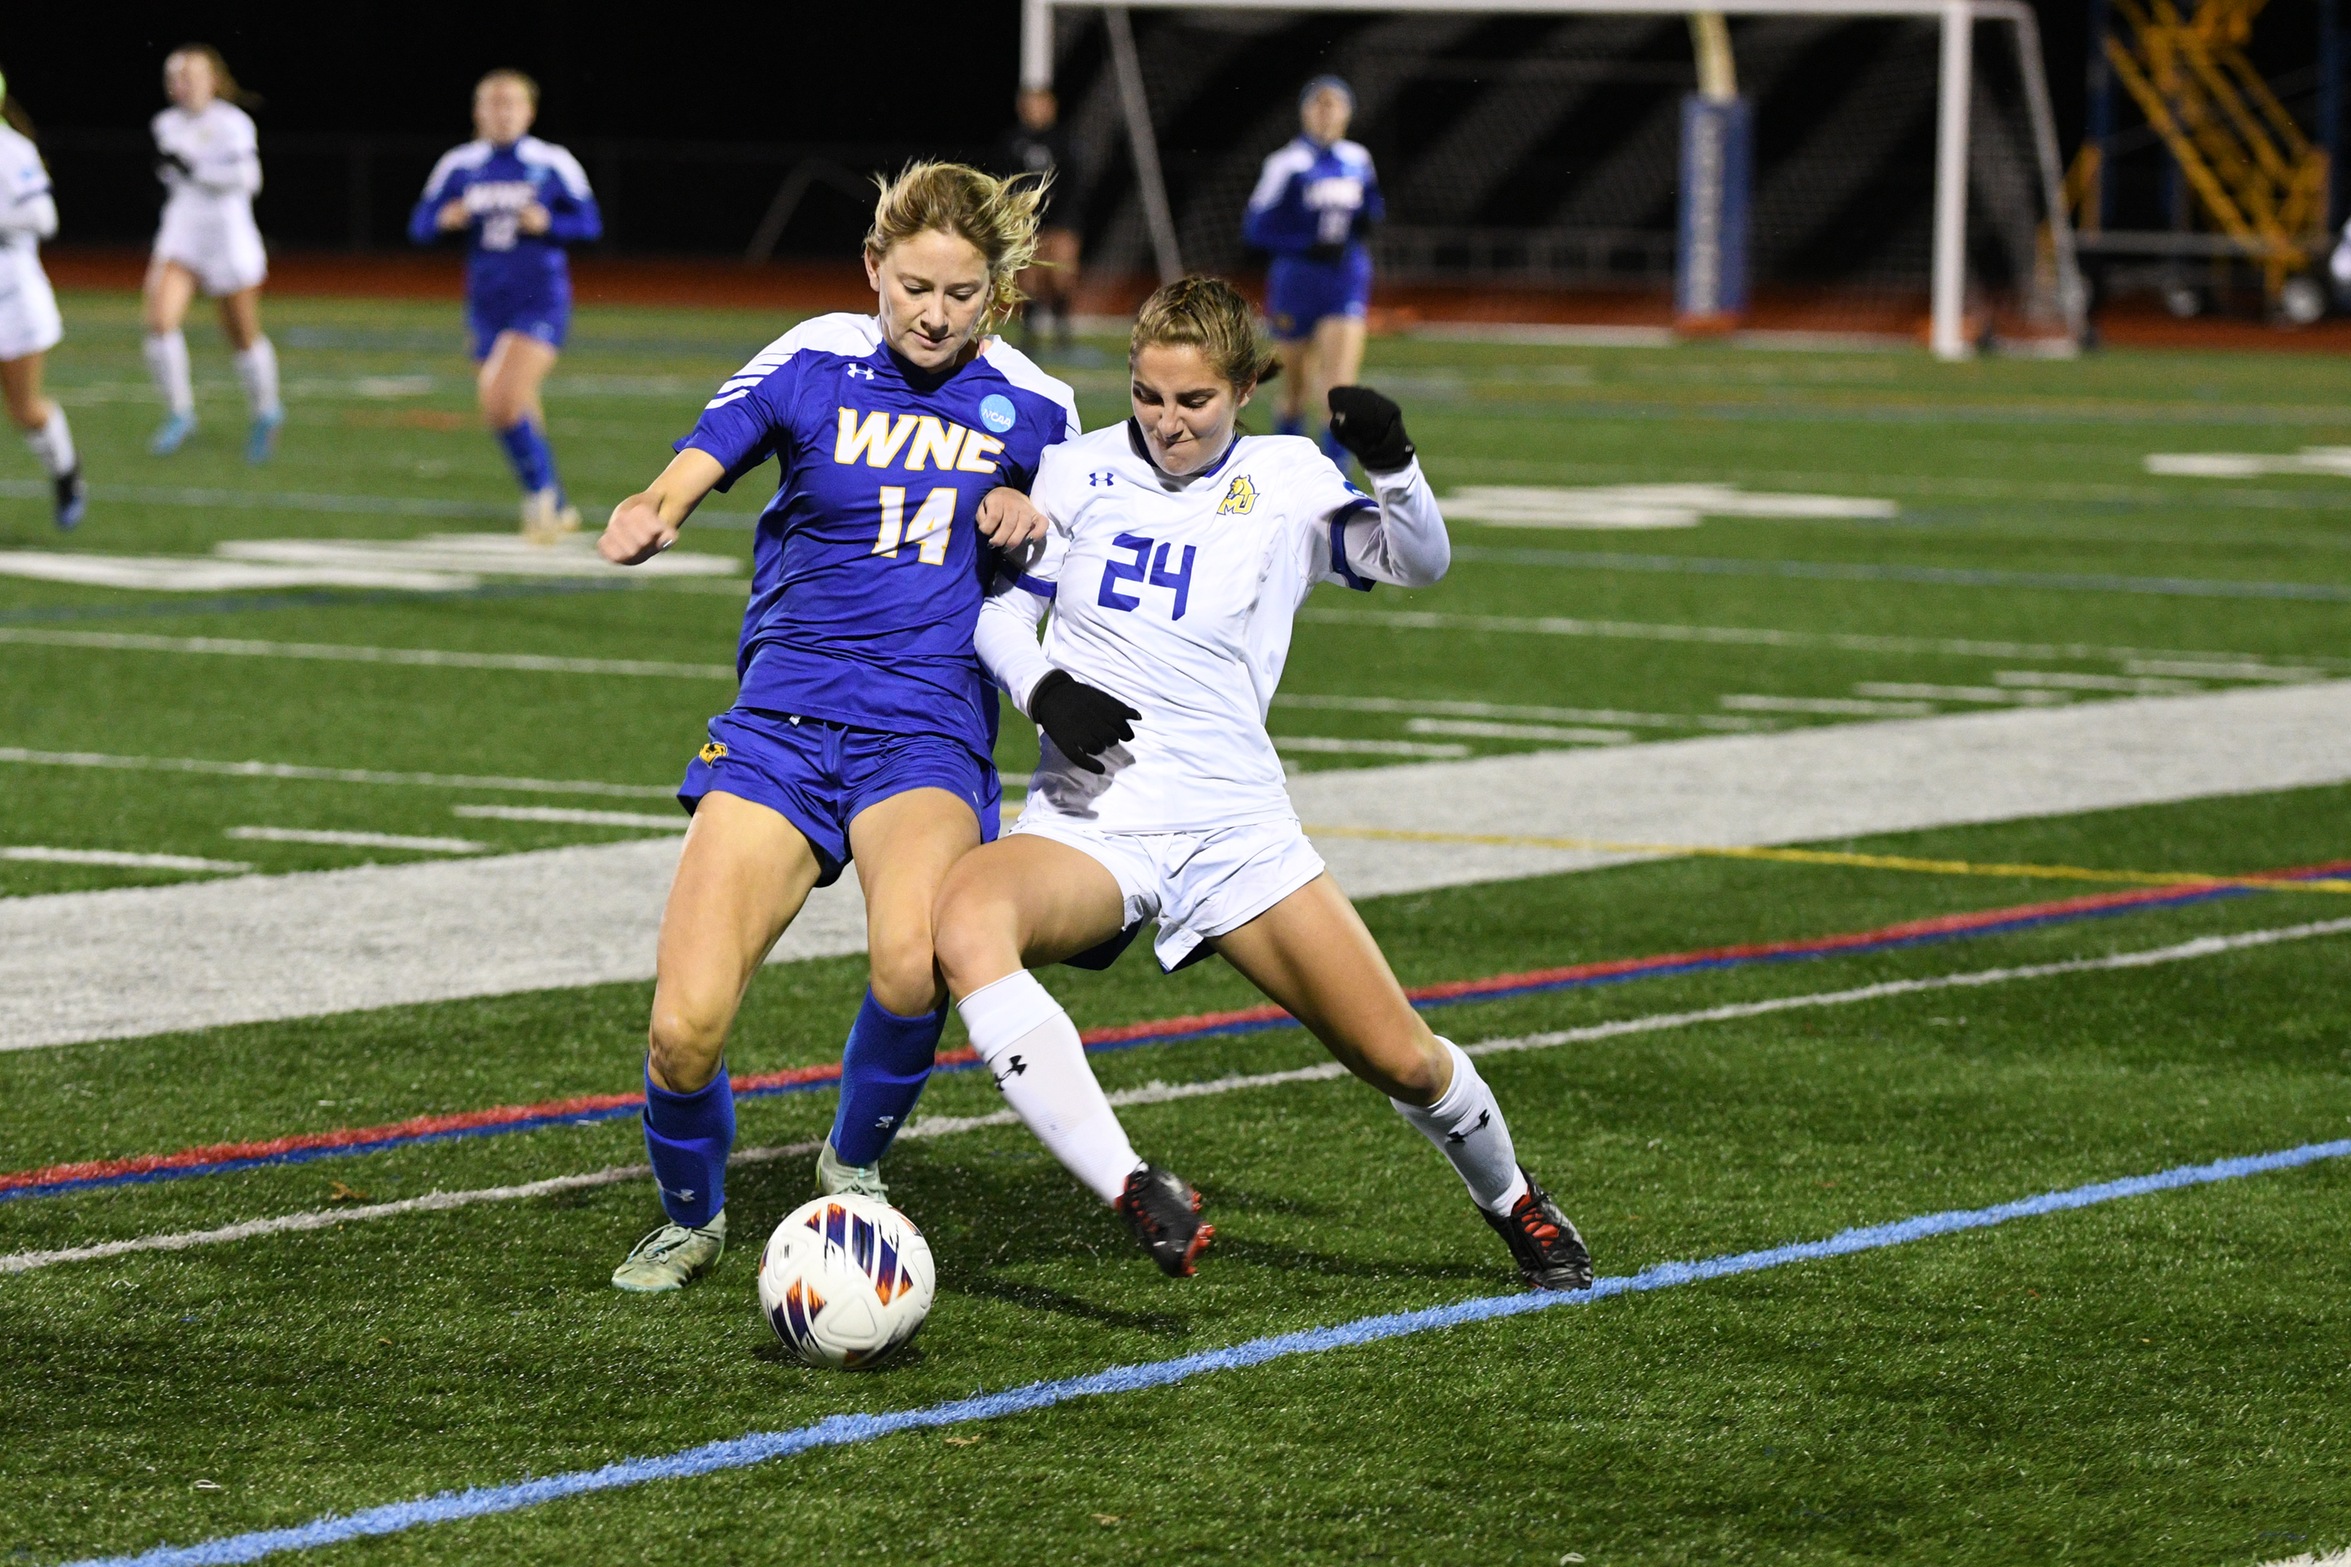 WNE Falls to Misericordia in Second Round of the NCAA Tournament